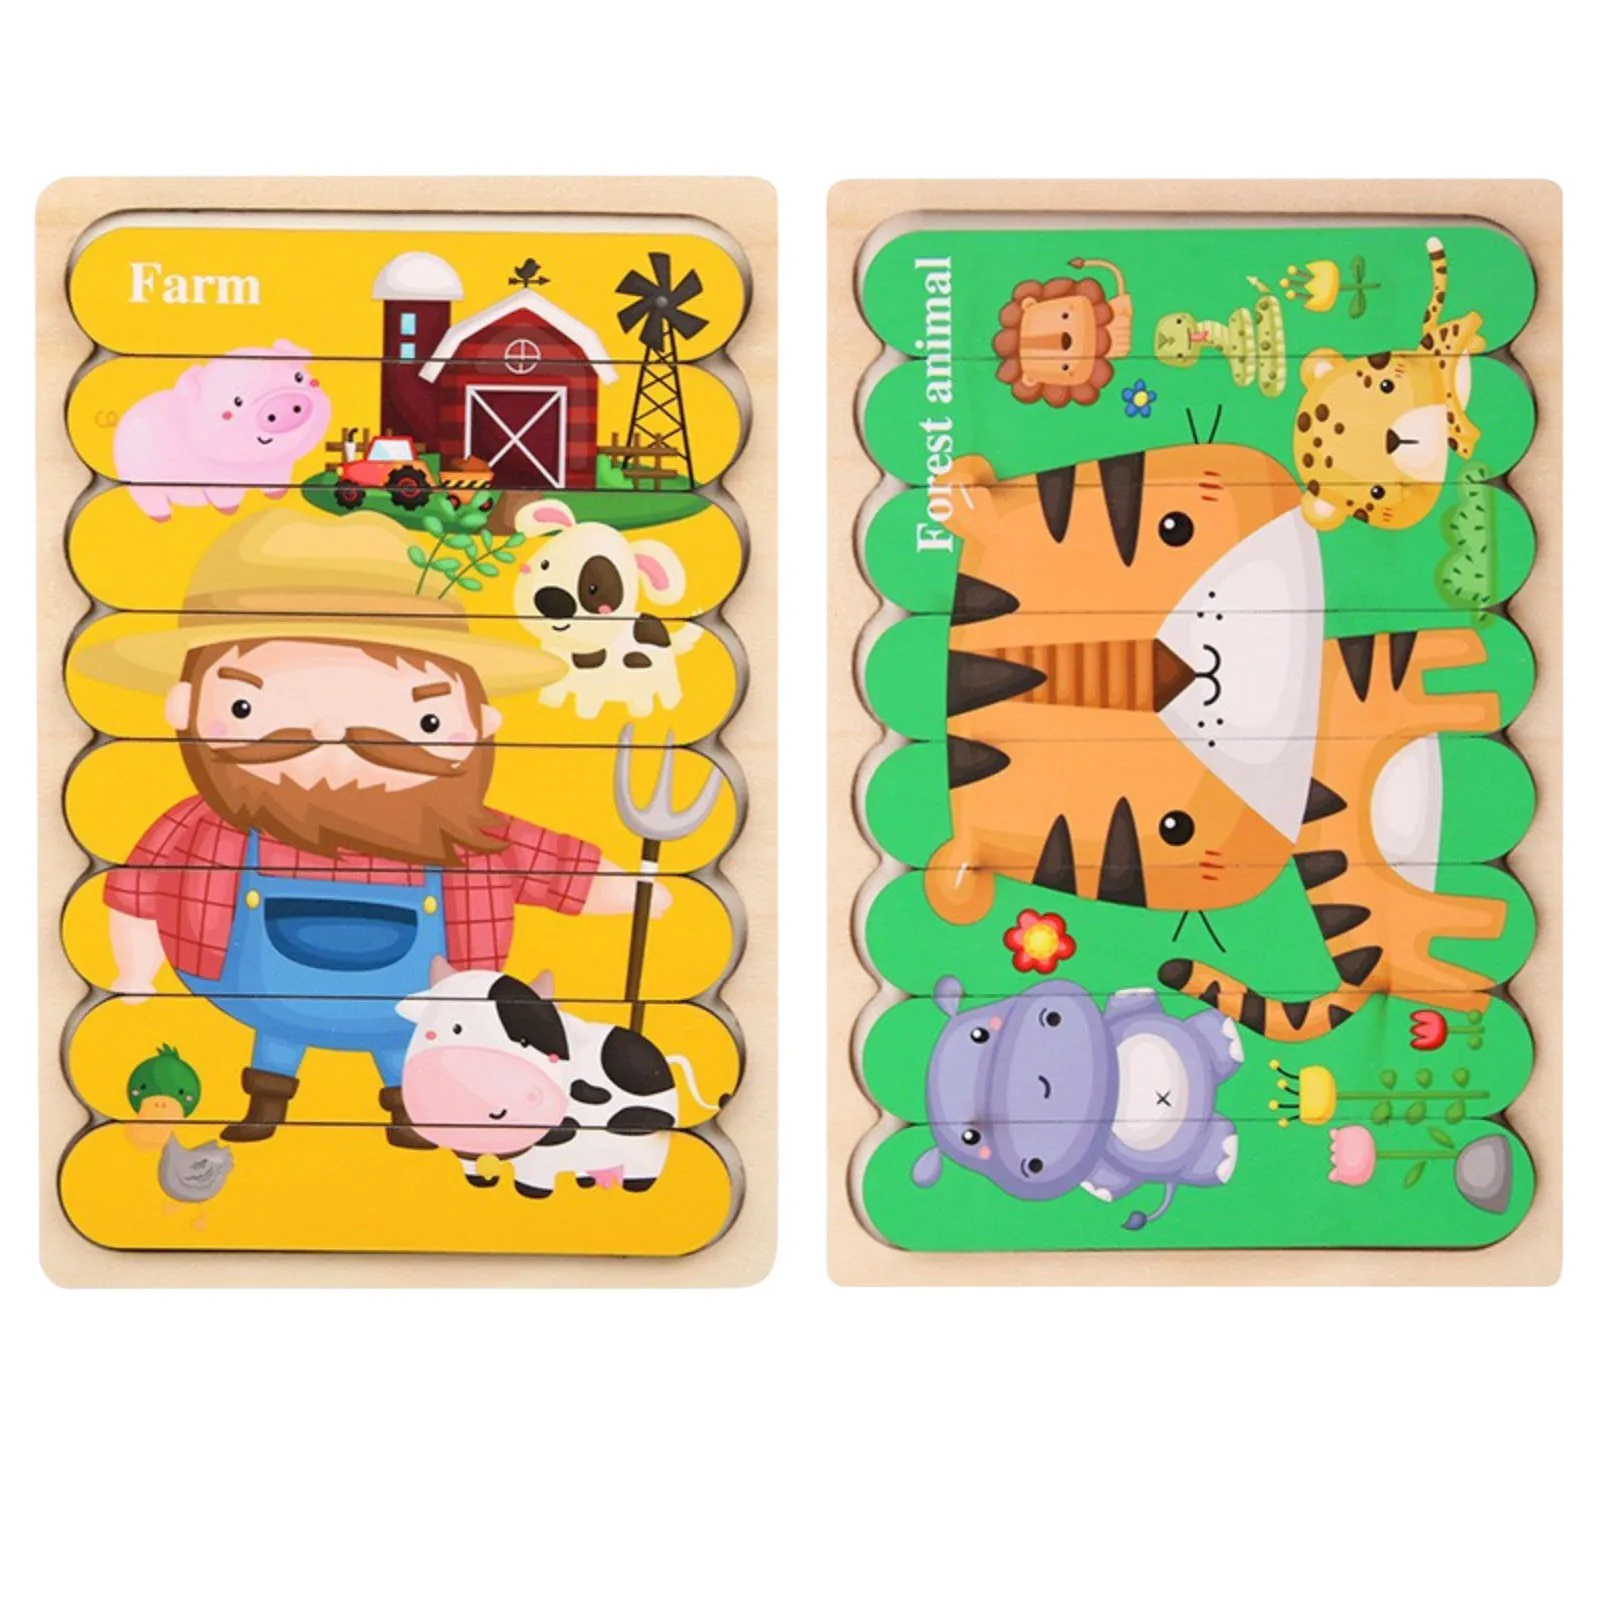 

Rowdy Toy Pattern Sorting Preschool Puzzles Peg Girls Toys Montessori Kids Toys Puzzle For Toddlers Educational Stacking And